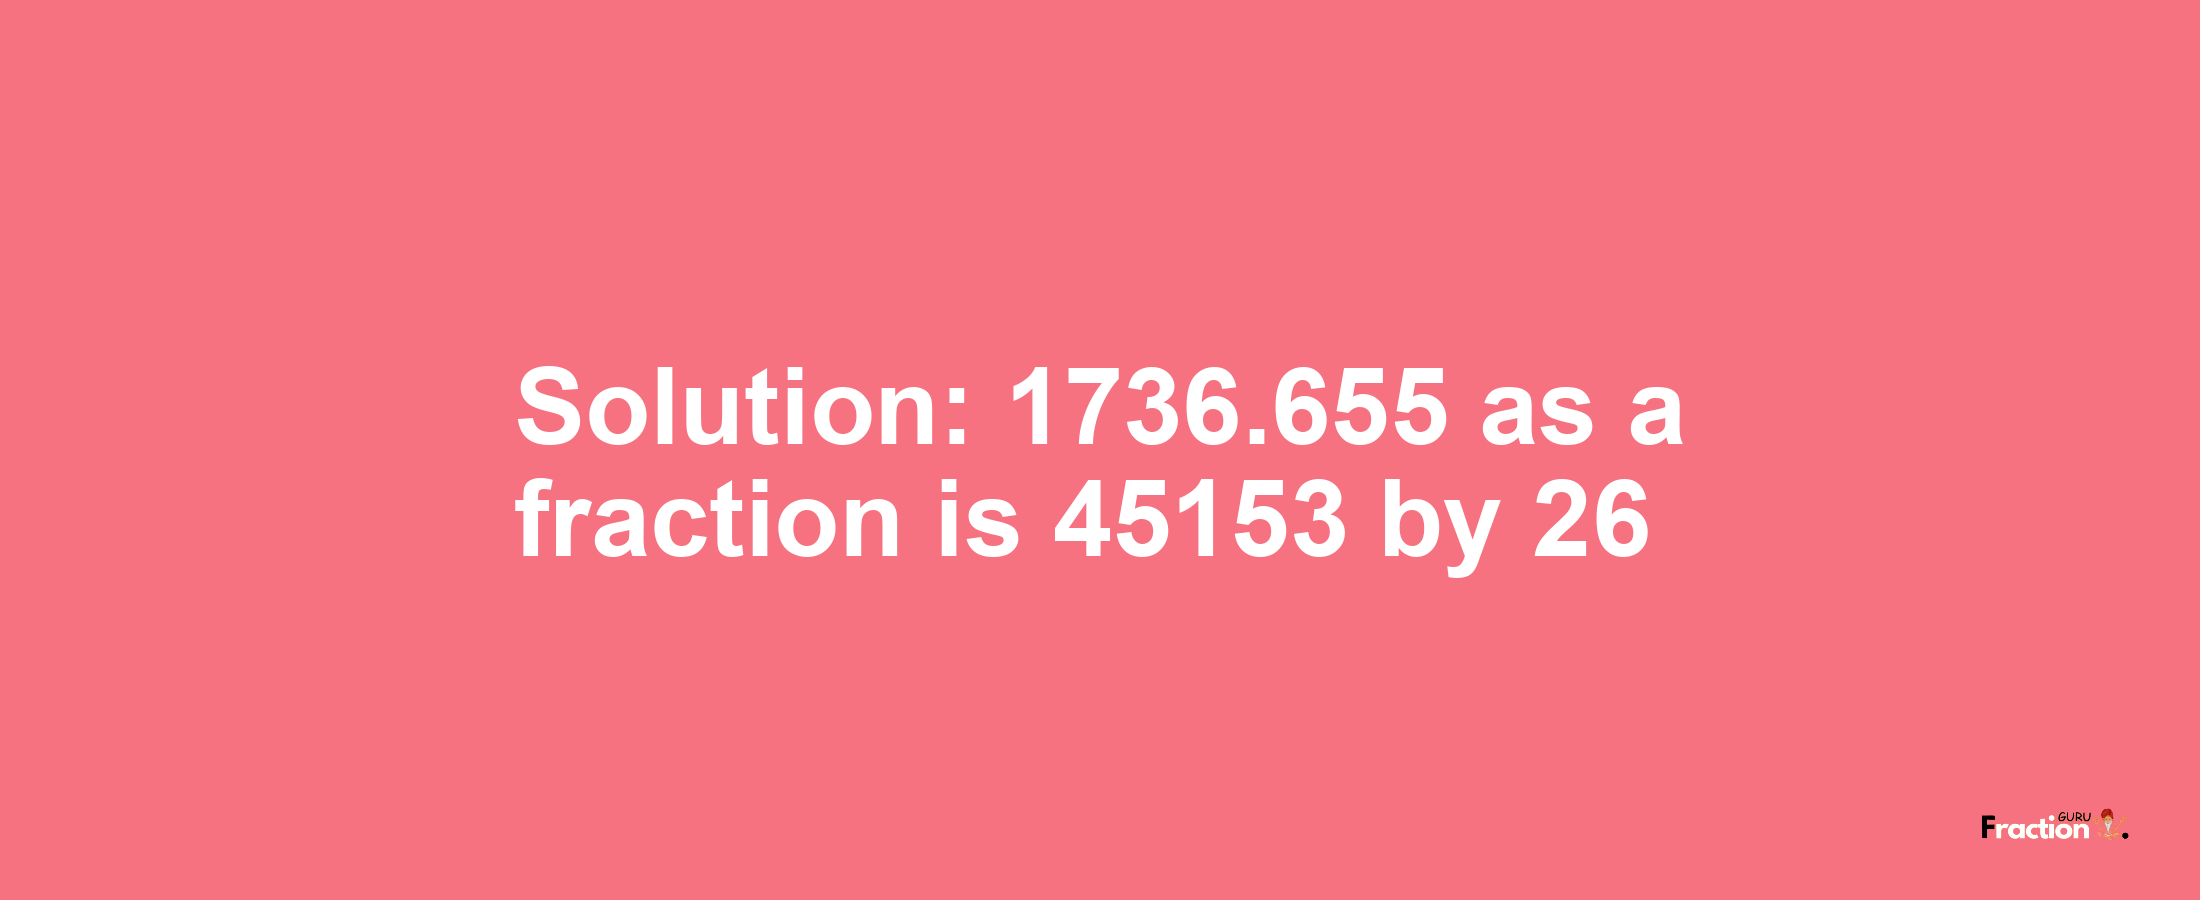 Solution:1736.655 as a fraction is 45153/26